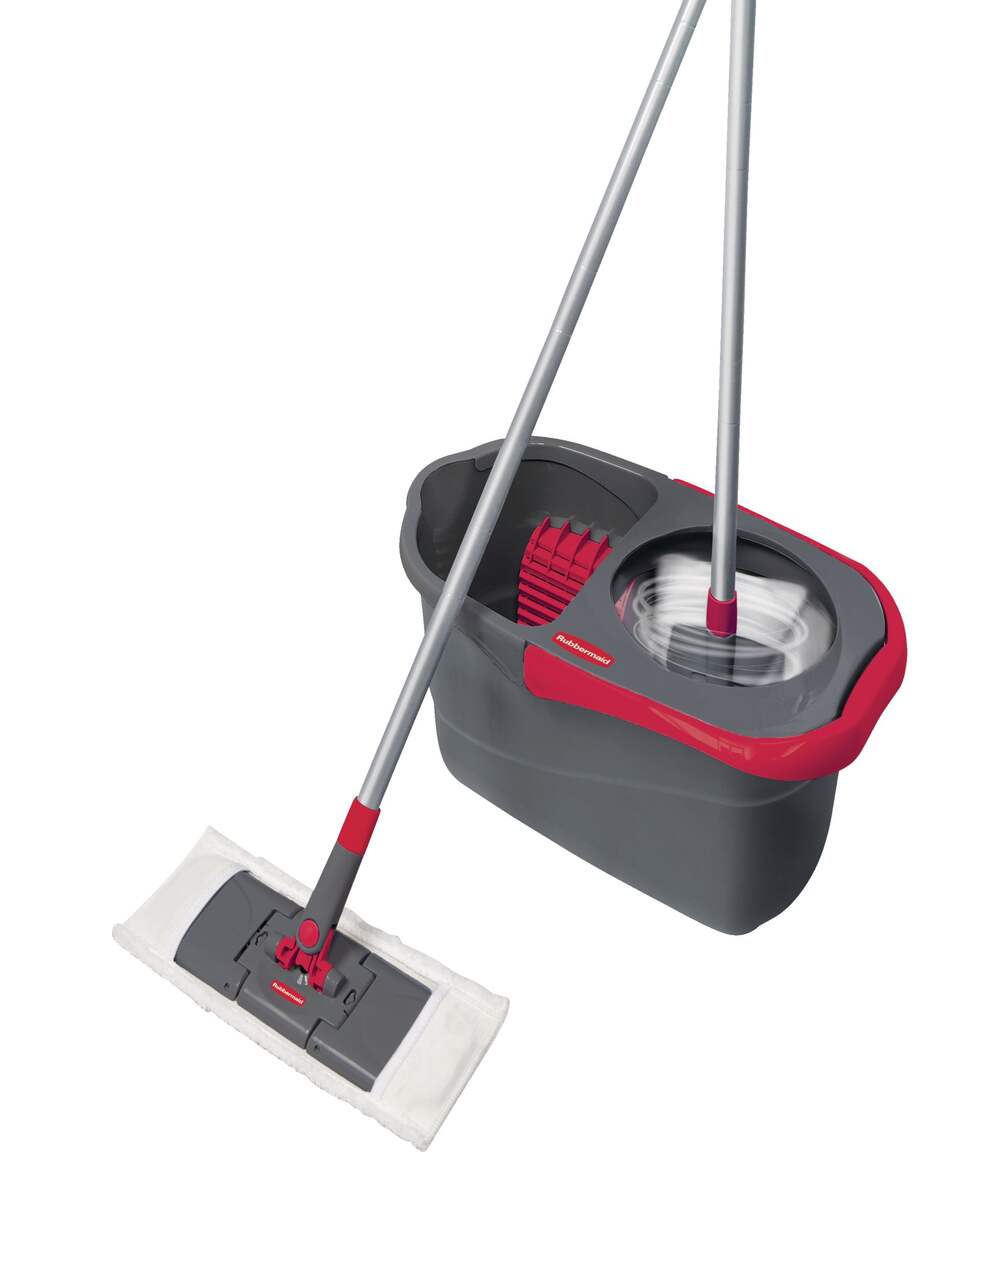 https://media-www.canadiantire.ca/product/living/cleaning/household-cleaning-tools/1425875/rubbermaid-flat-spin-mop-system-0bf48578-bb0d-4e66-8e66-e4efaefab040-jpgrendition.jpg?imdensity=1&imwidth=640&impolicy=mZoom